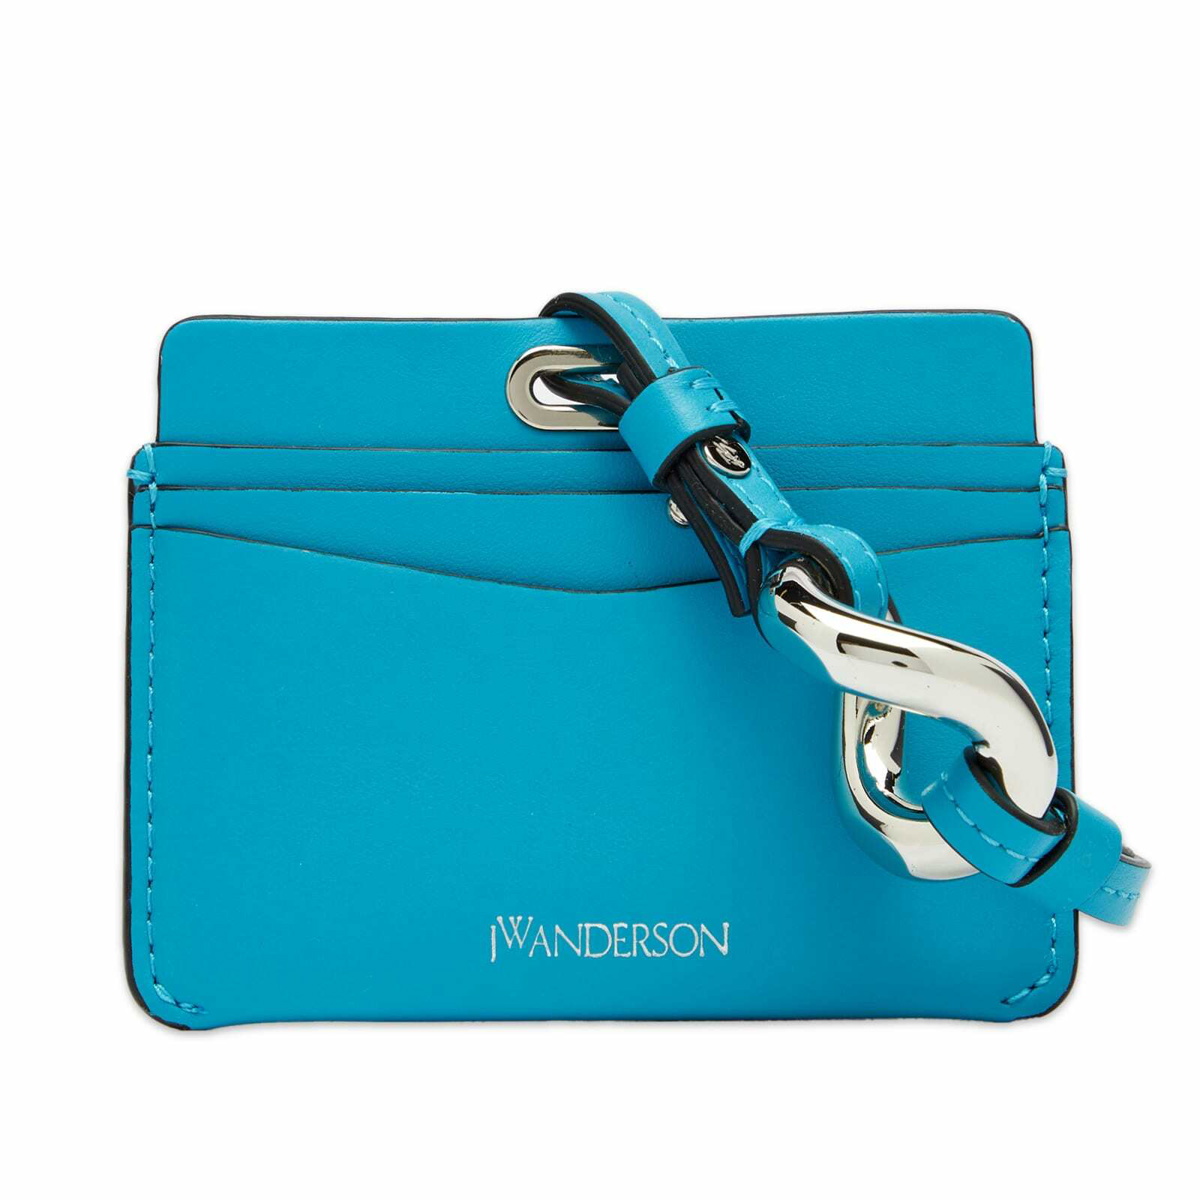 JW Anderson Men's Chain Strap Cardholder in Turquoise JW Anderson